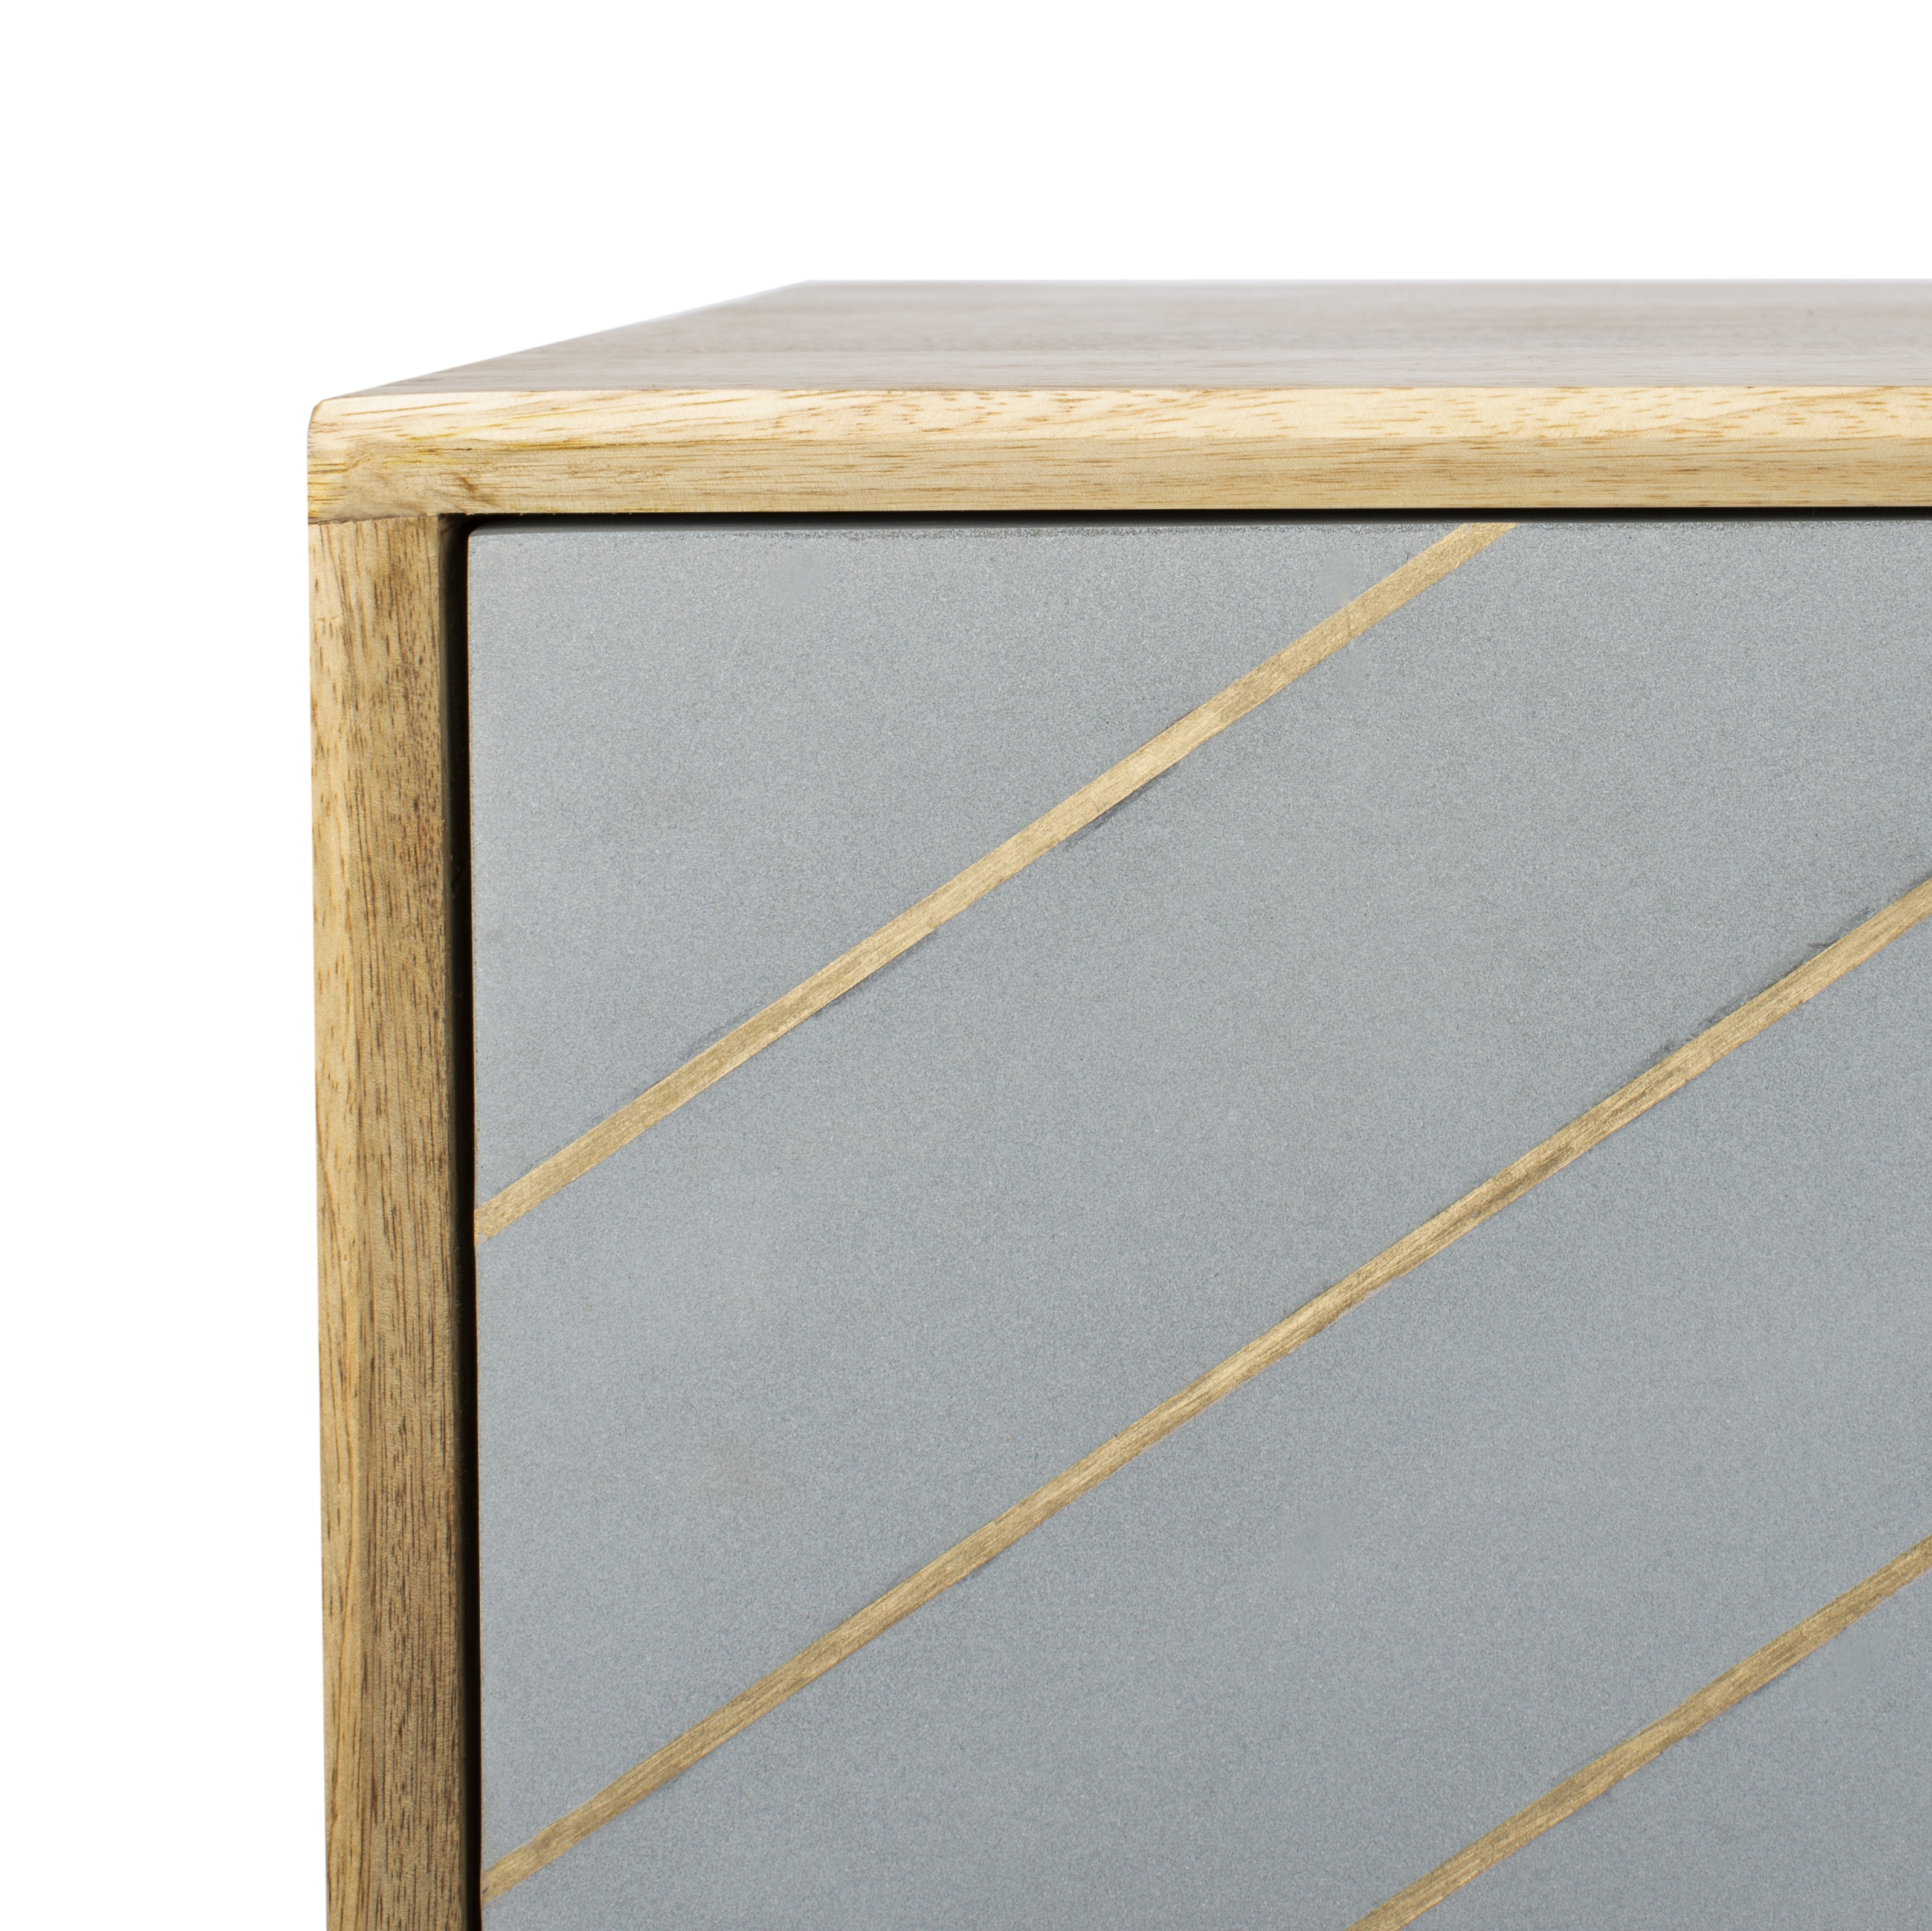 Titan Gold Inlayed Cement Sideboard - Natural Mango/Brass/Cement - Arlo Home - Image 6